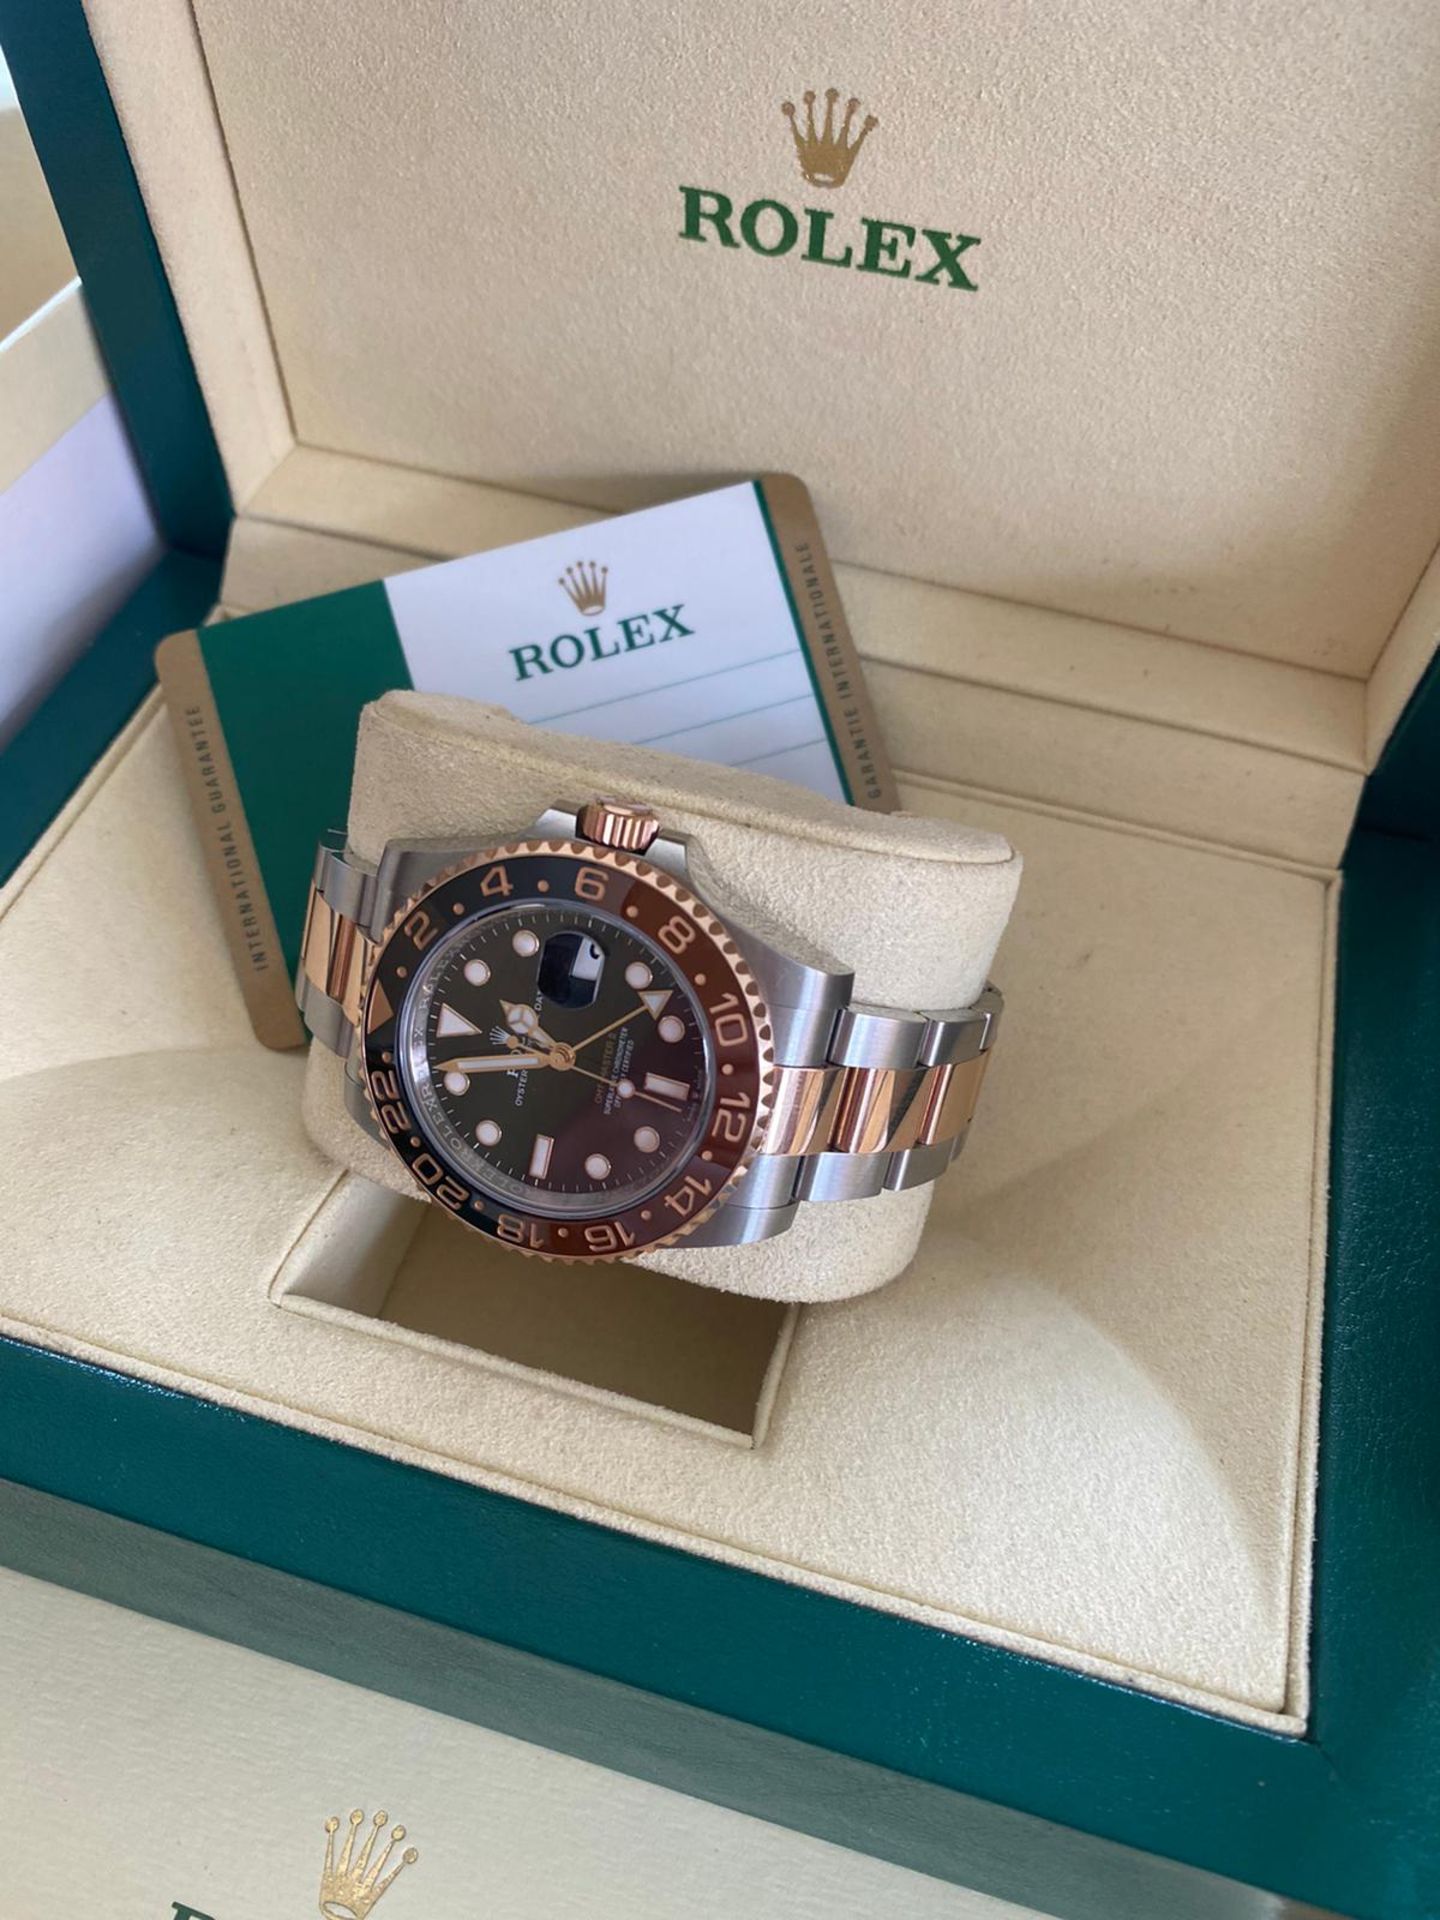 2019 ROLEX GMT-MASTER II ROOT BEER WATCH LOCATION NORTH YORKSHIRE - Image 3 of 4